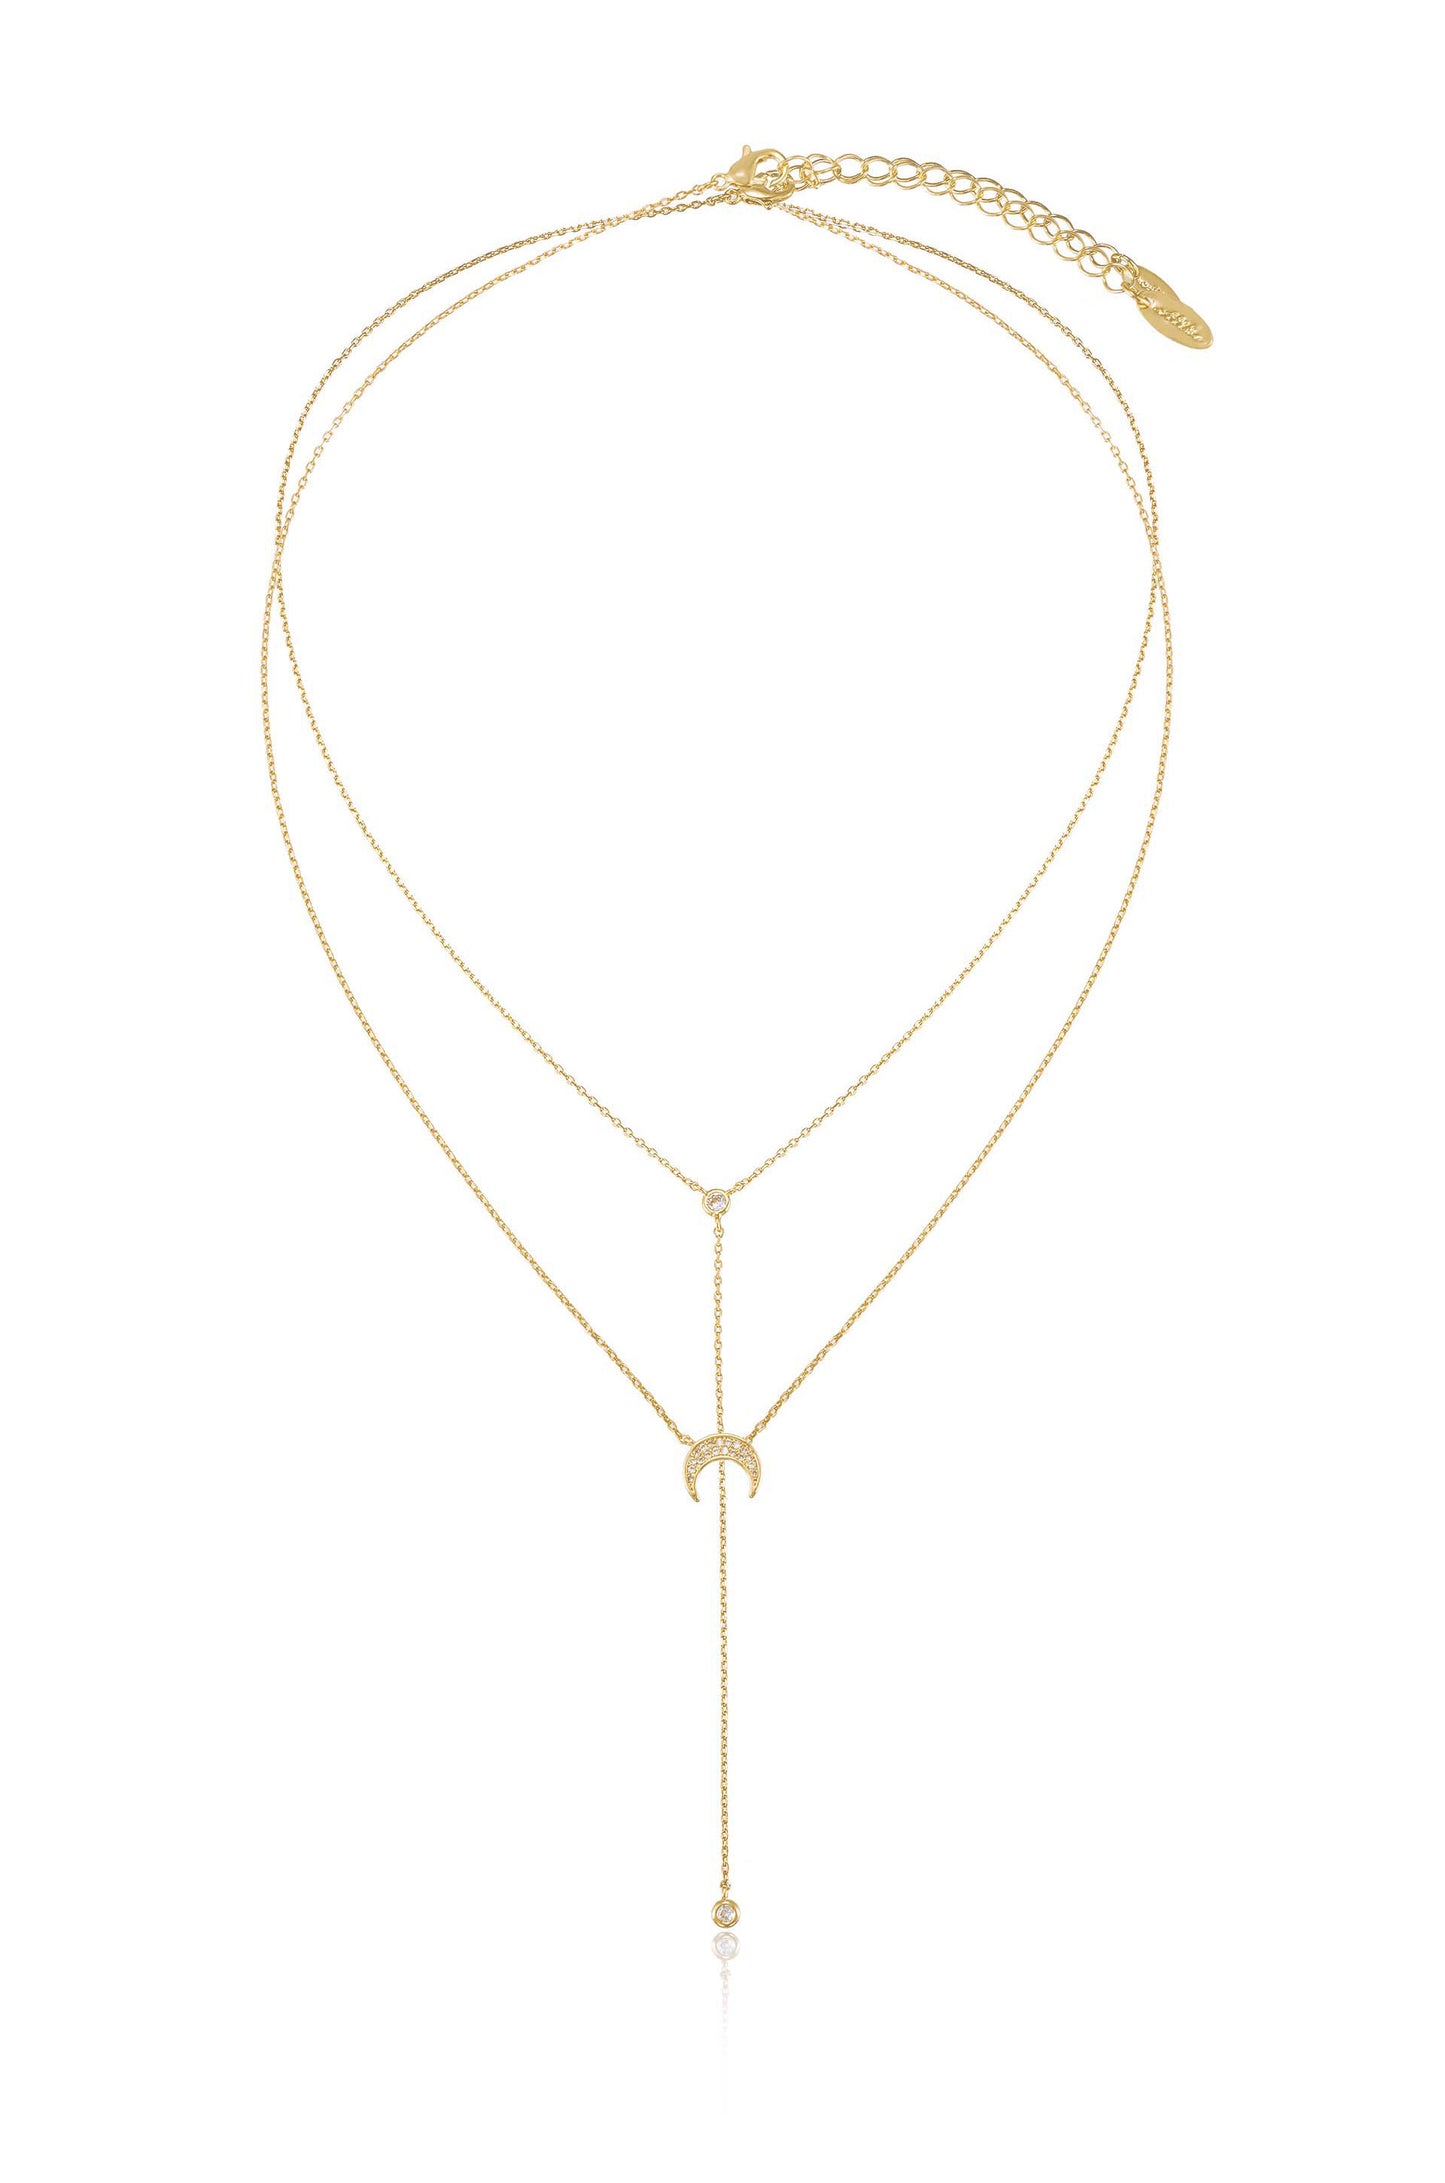 Dainty Layered Crescent Moon 18k Gold Plated Necklace Set full